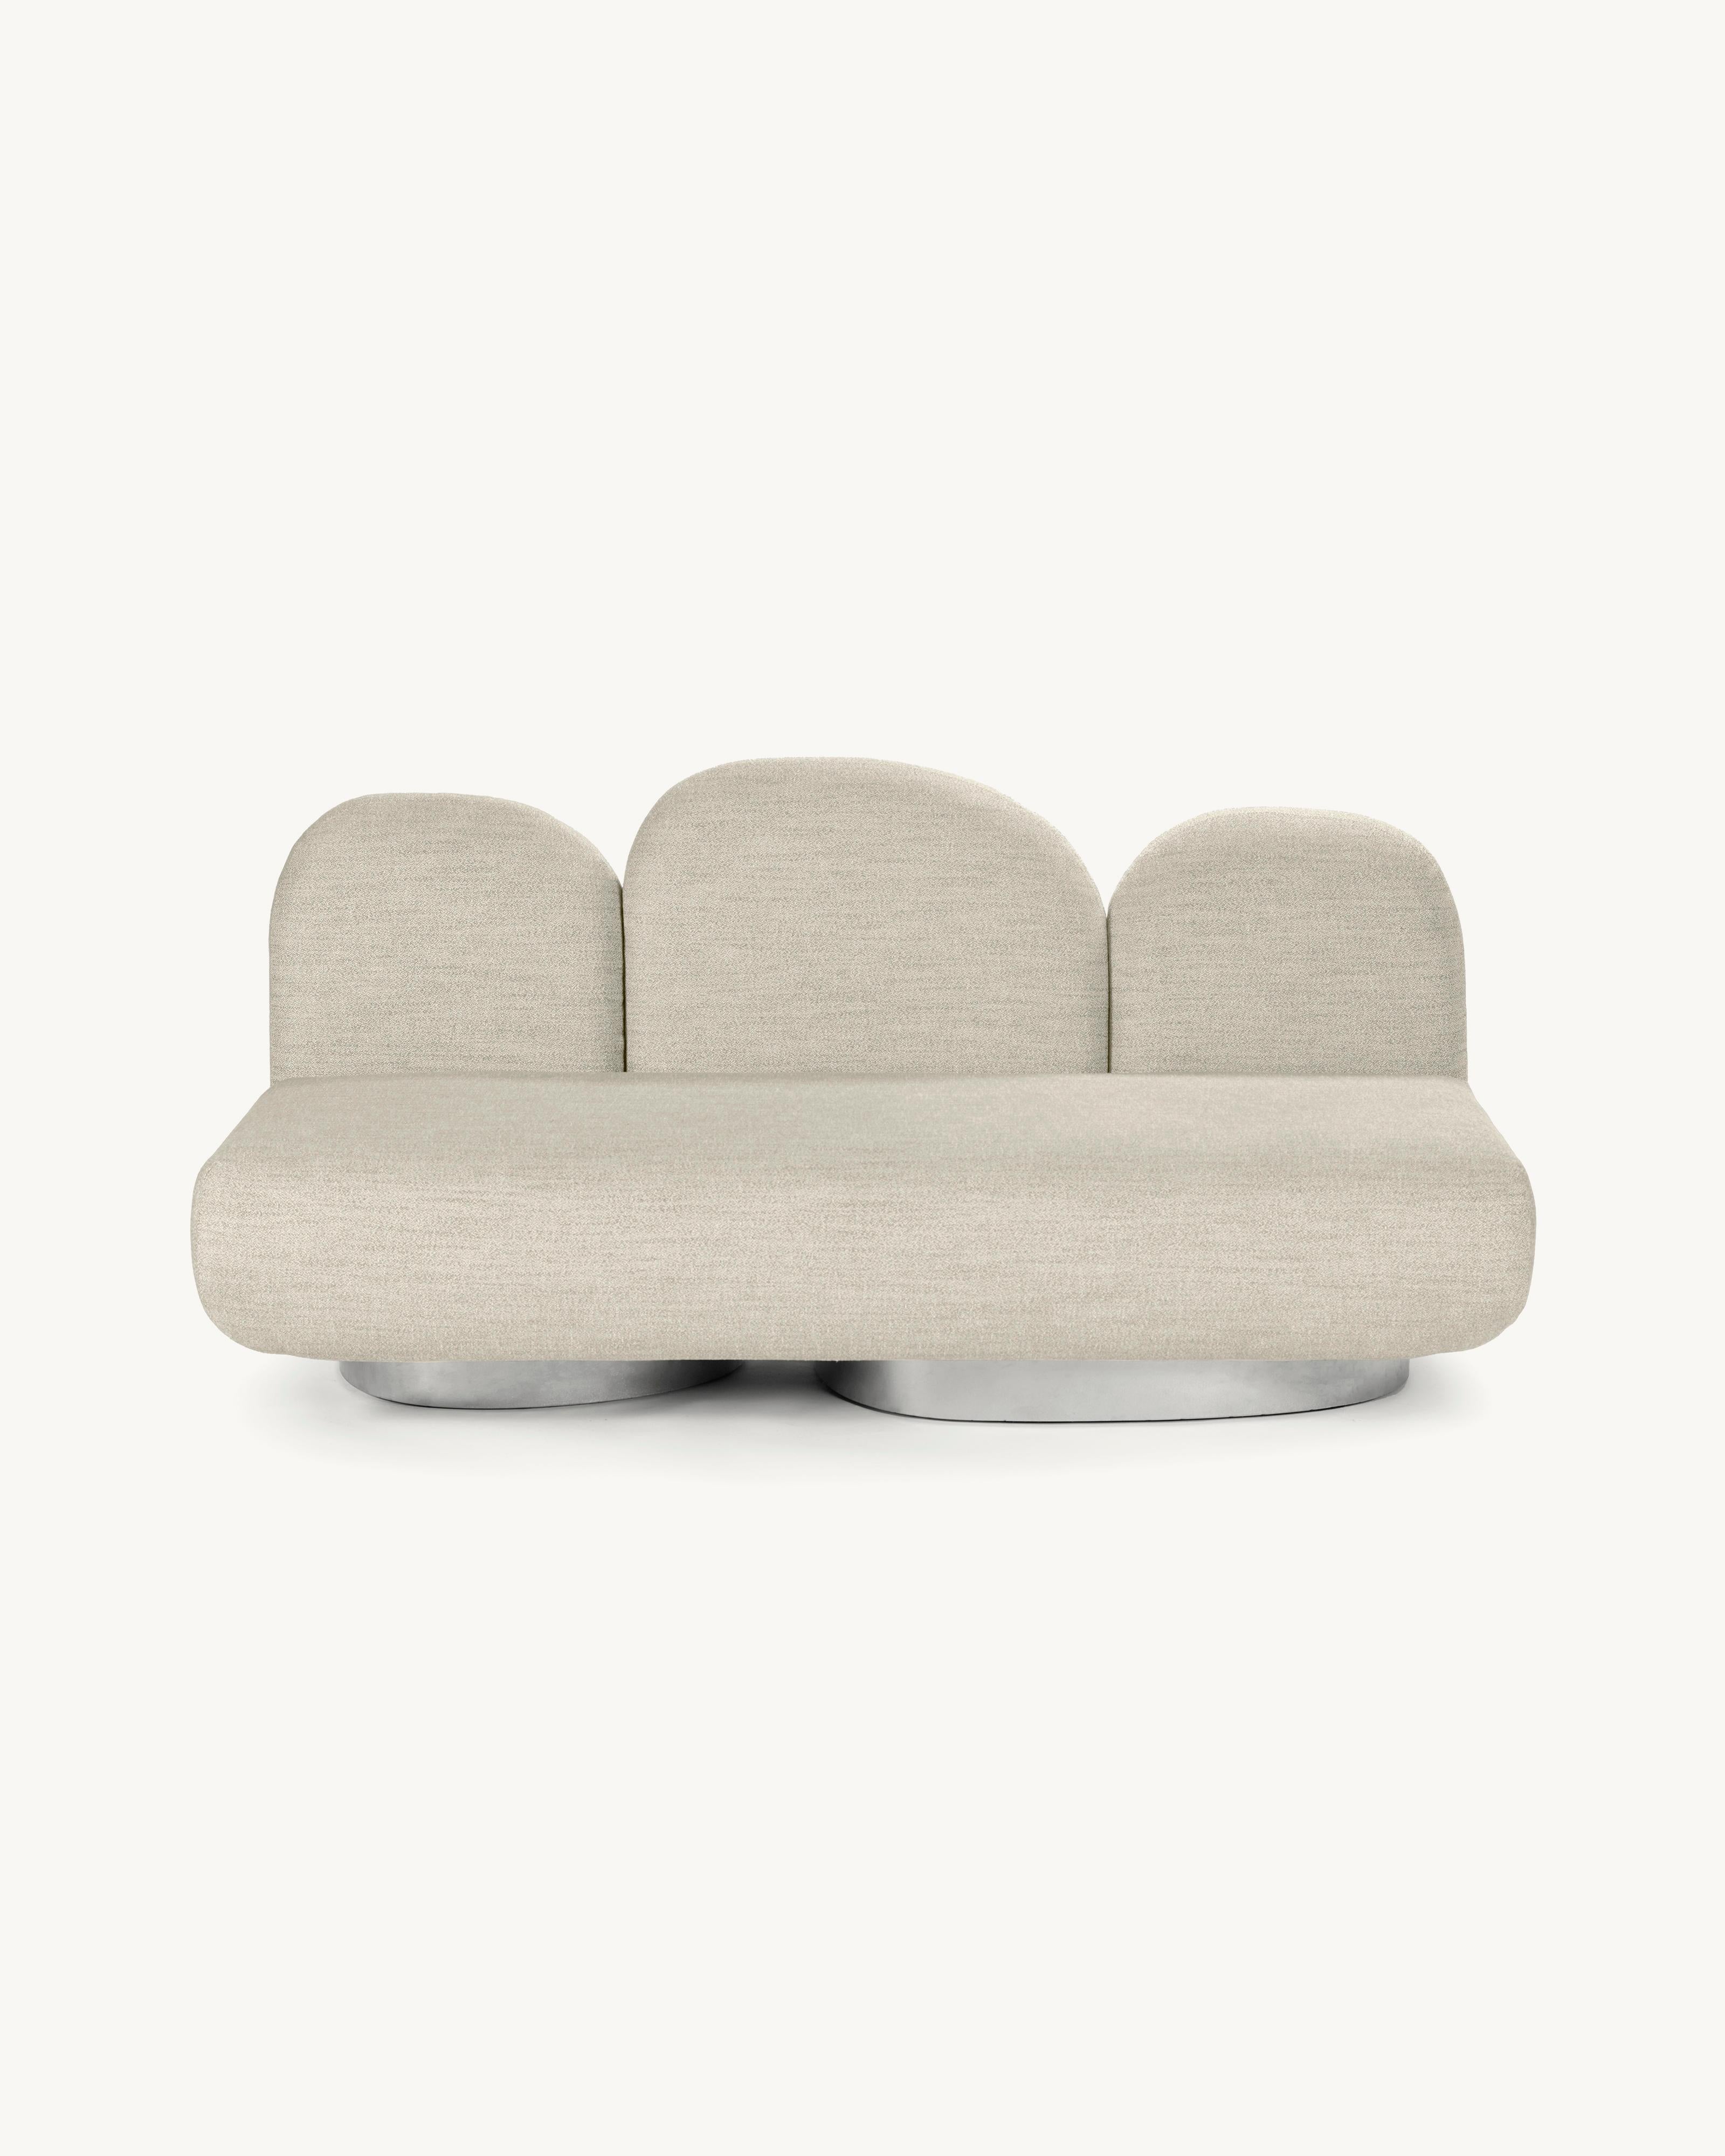 Contemporary Sofa 'Assemble' by Destroyers/Builders, 2 seaters For Sale 6